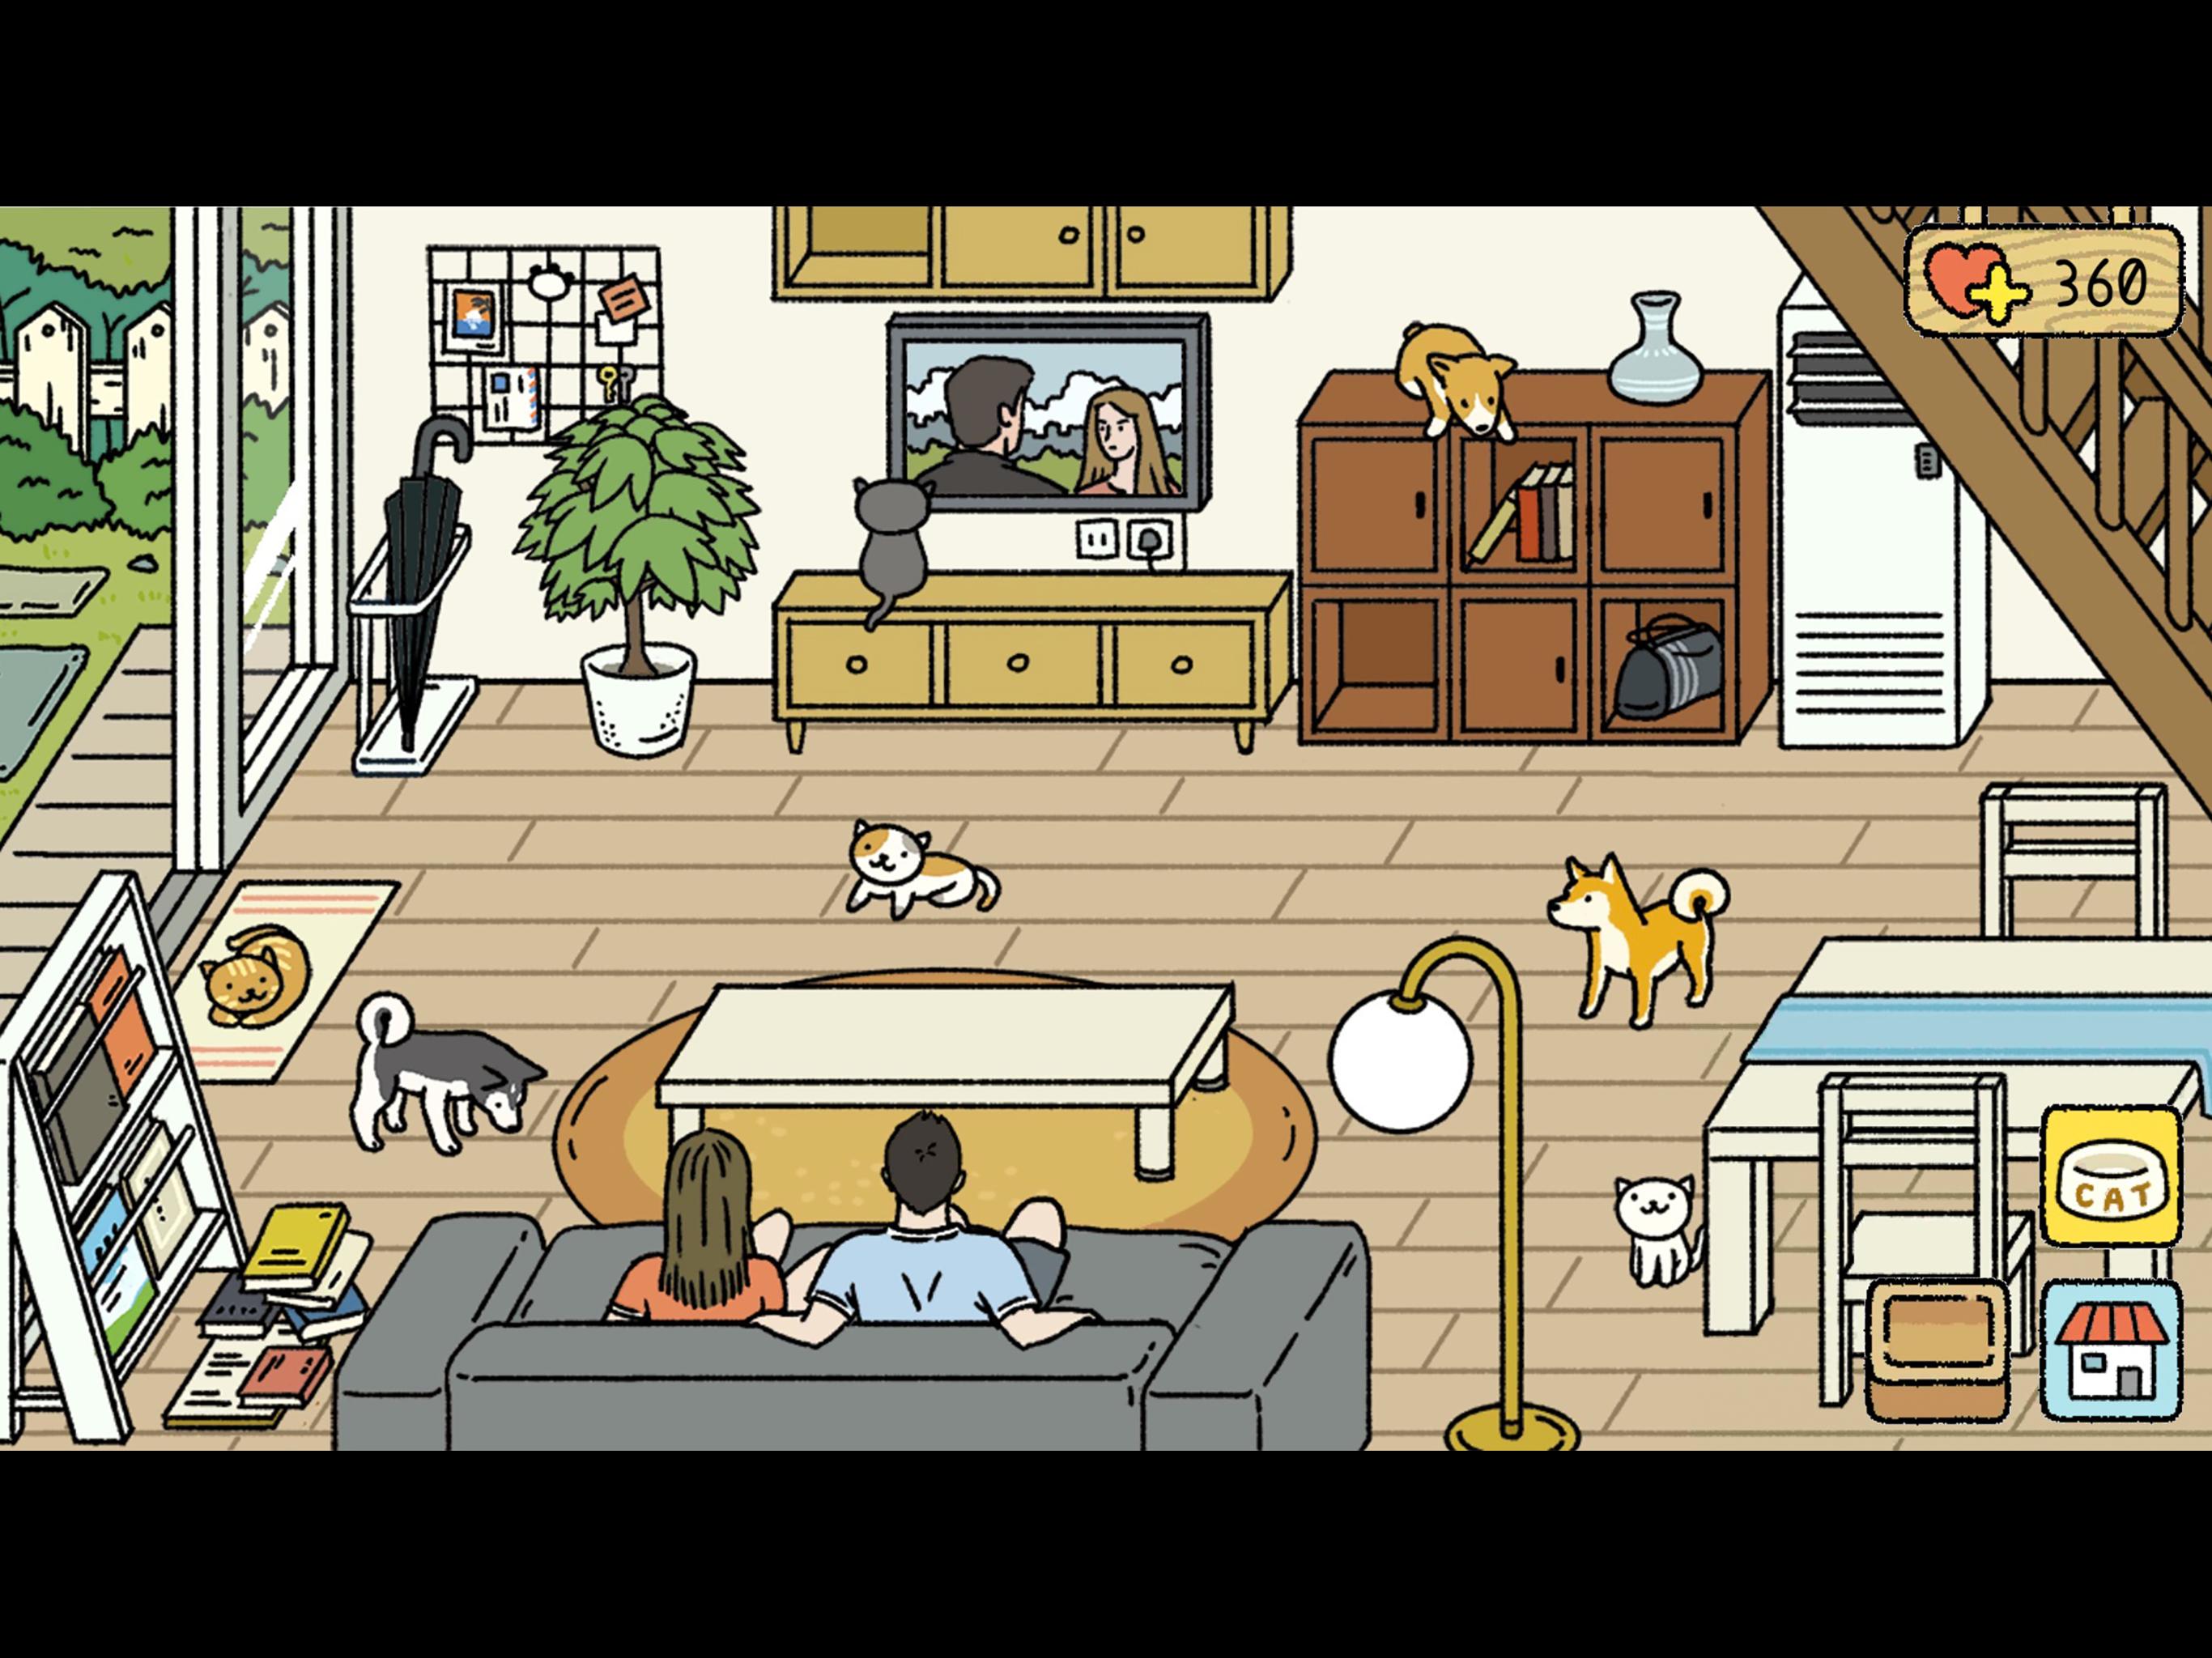 Adorable Home for Android - APK Download